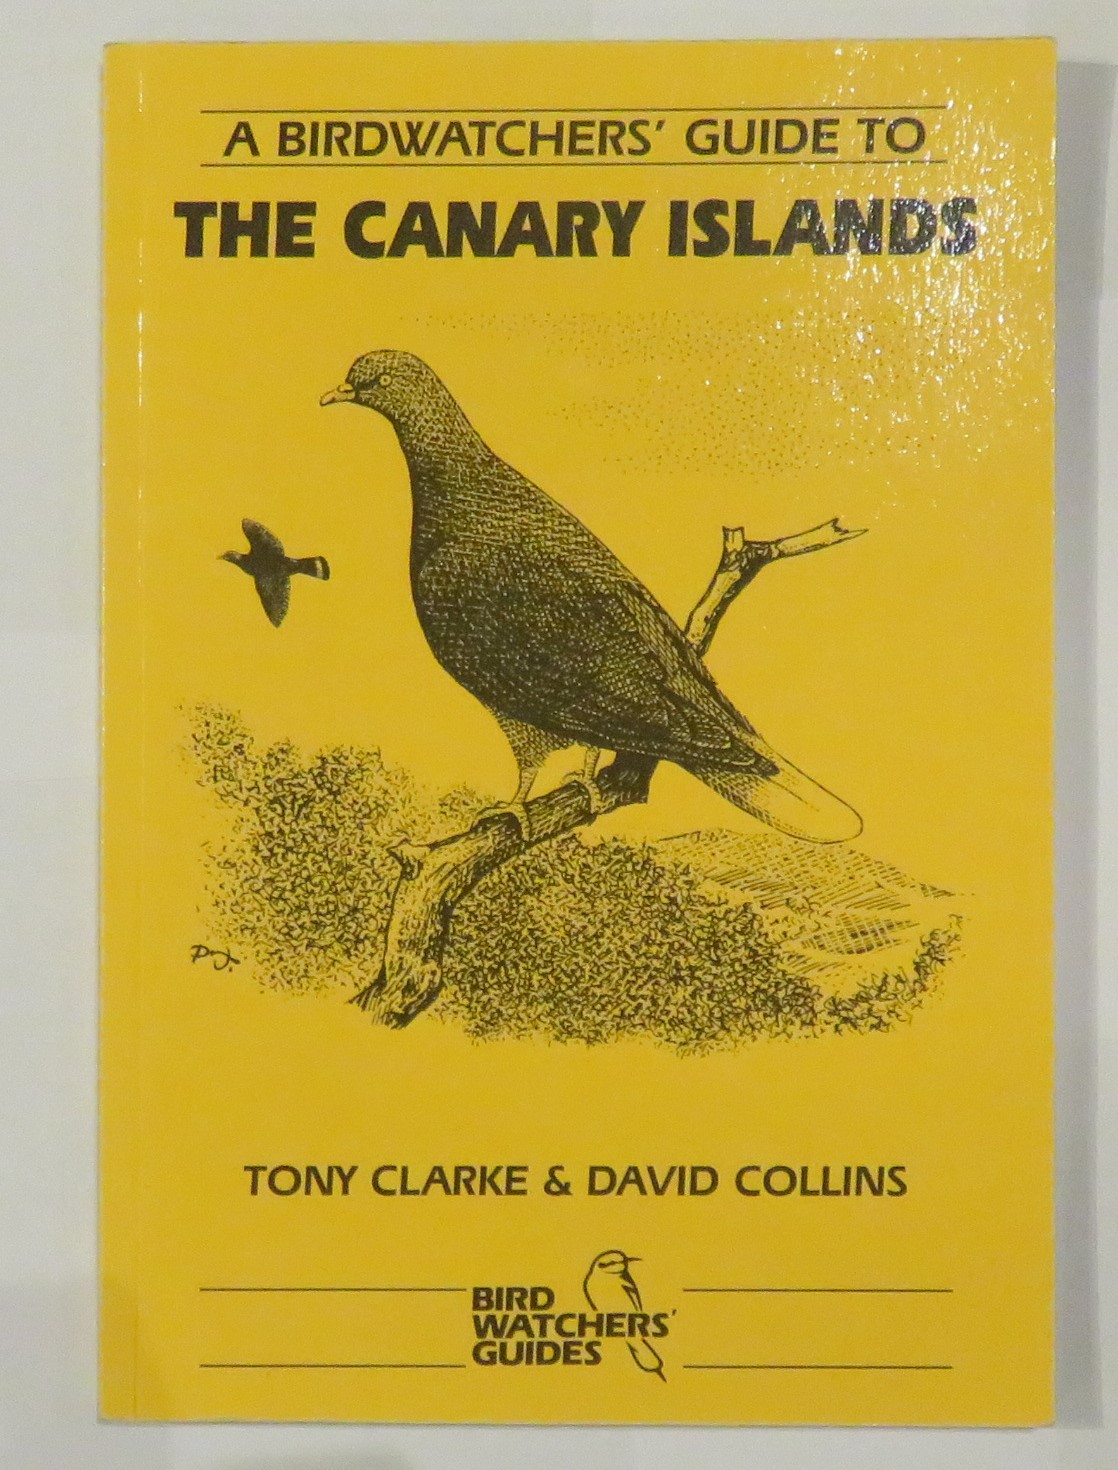 A Birdwatchers' Guide to The Canary Islands